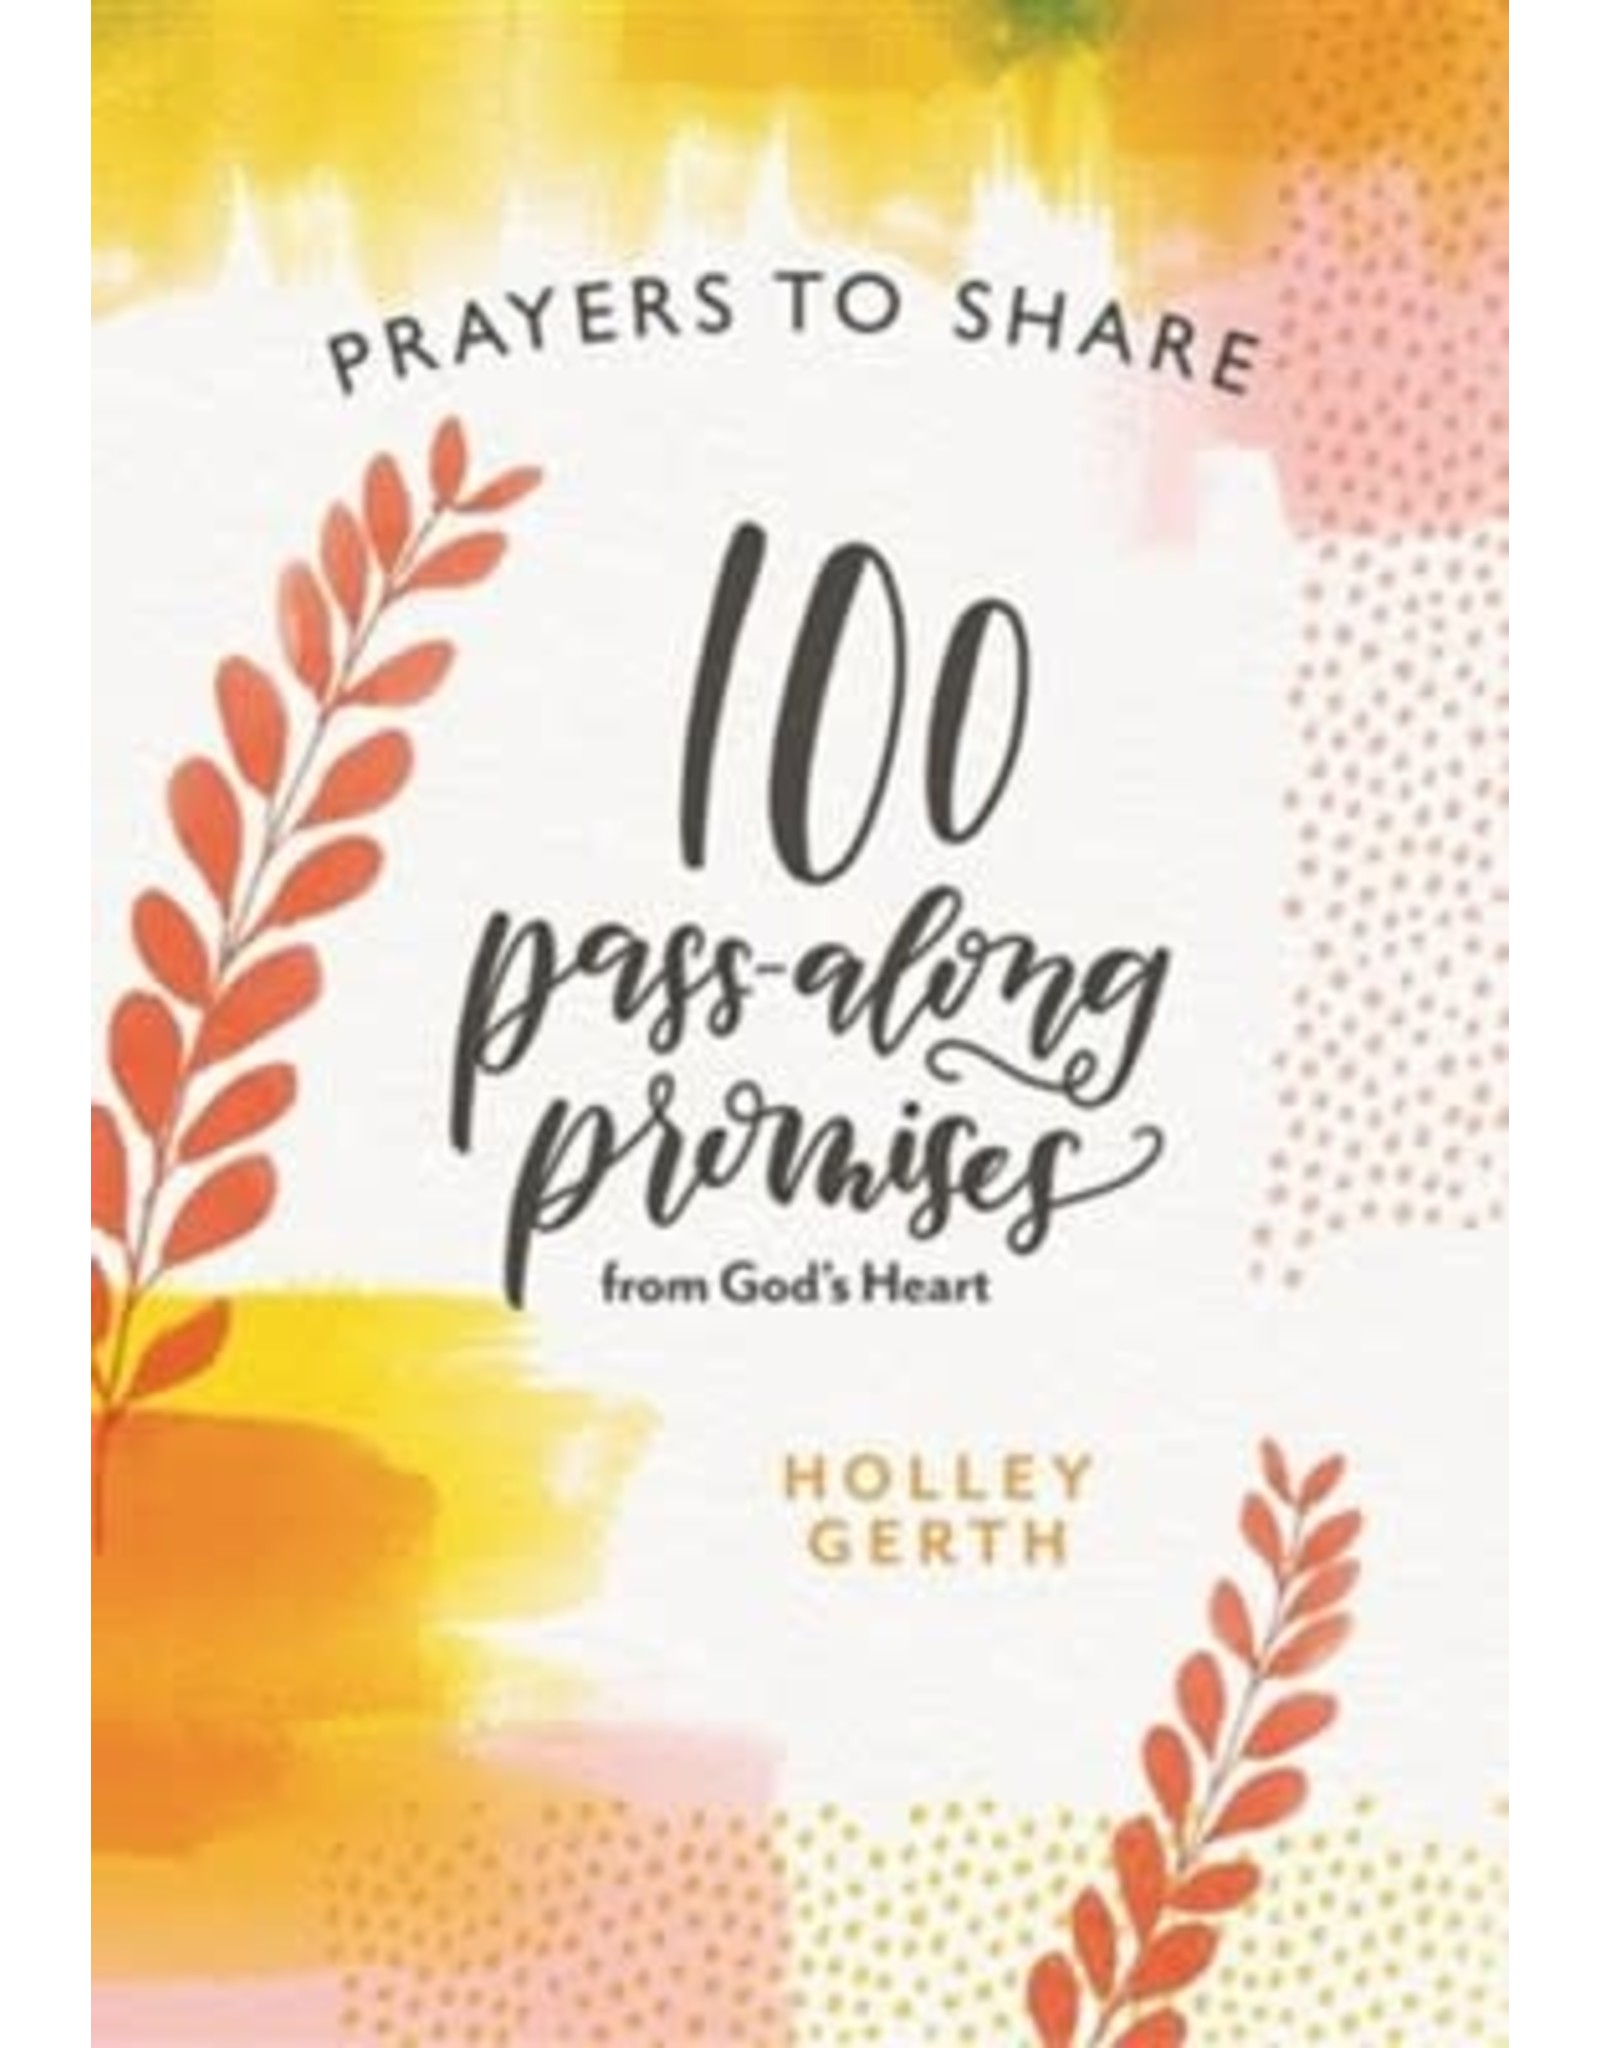 Prayers to Share: 100 Promises